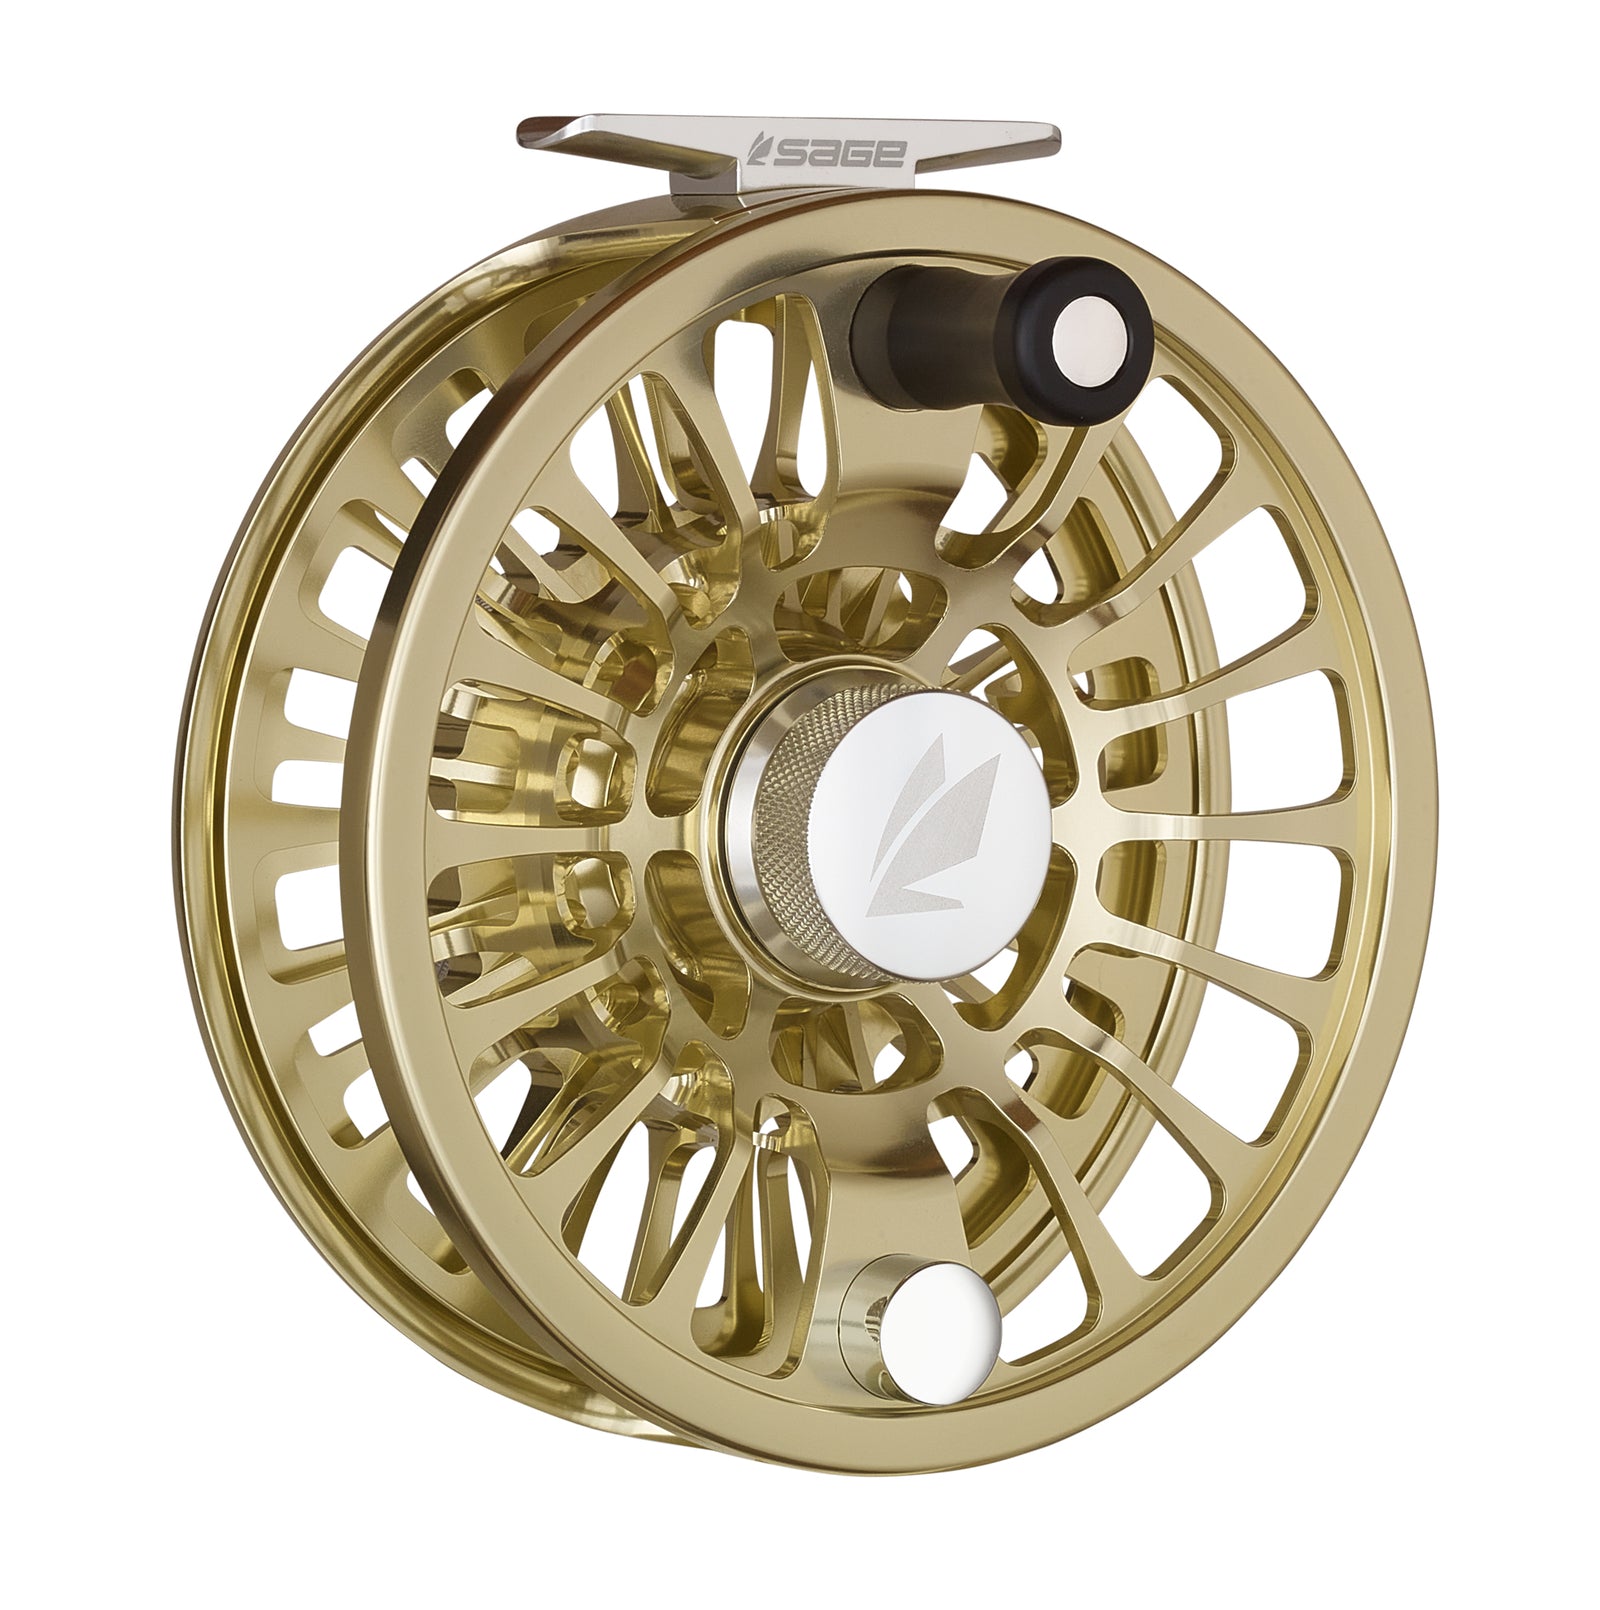 Nautilus X Series Fly Reels in Glades Green